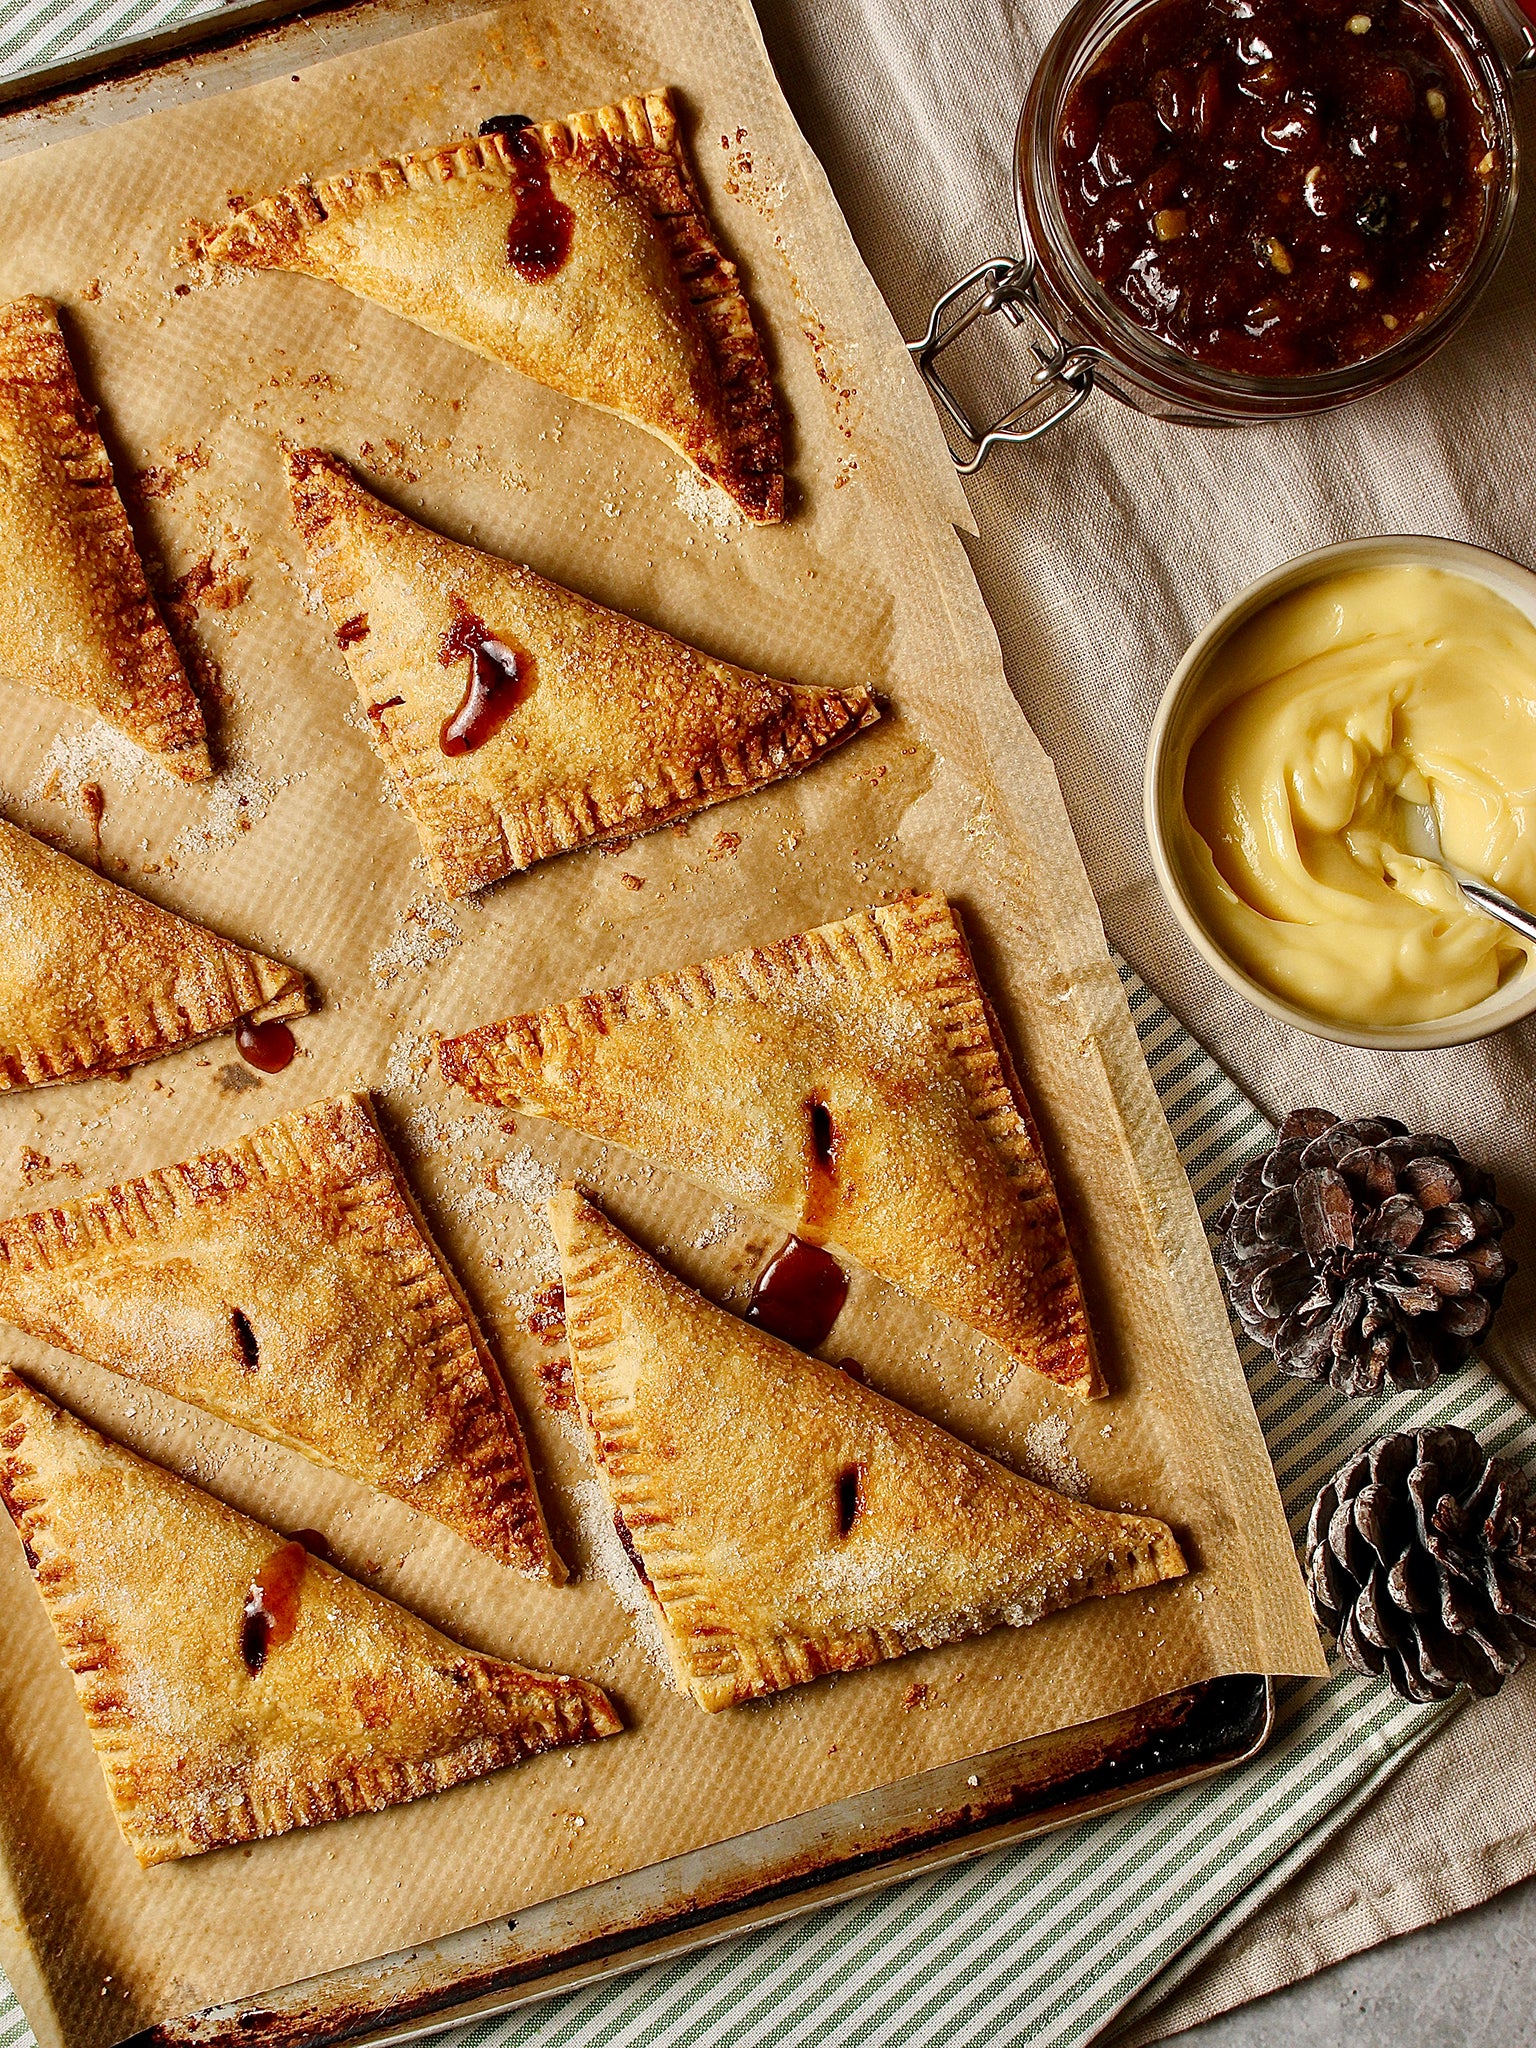 All I want for Christmas is a tasty twist on a classic – such as this mince pie turnover